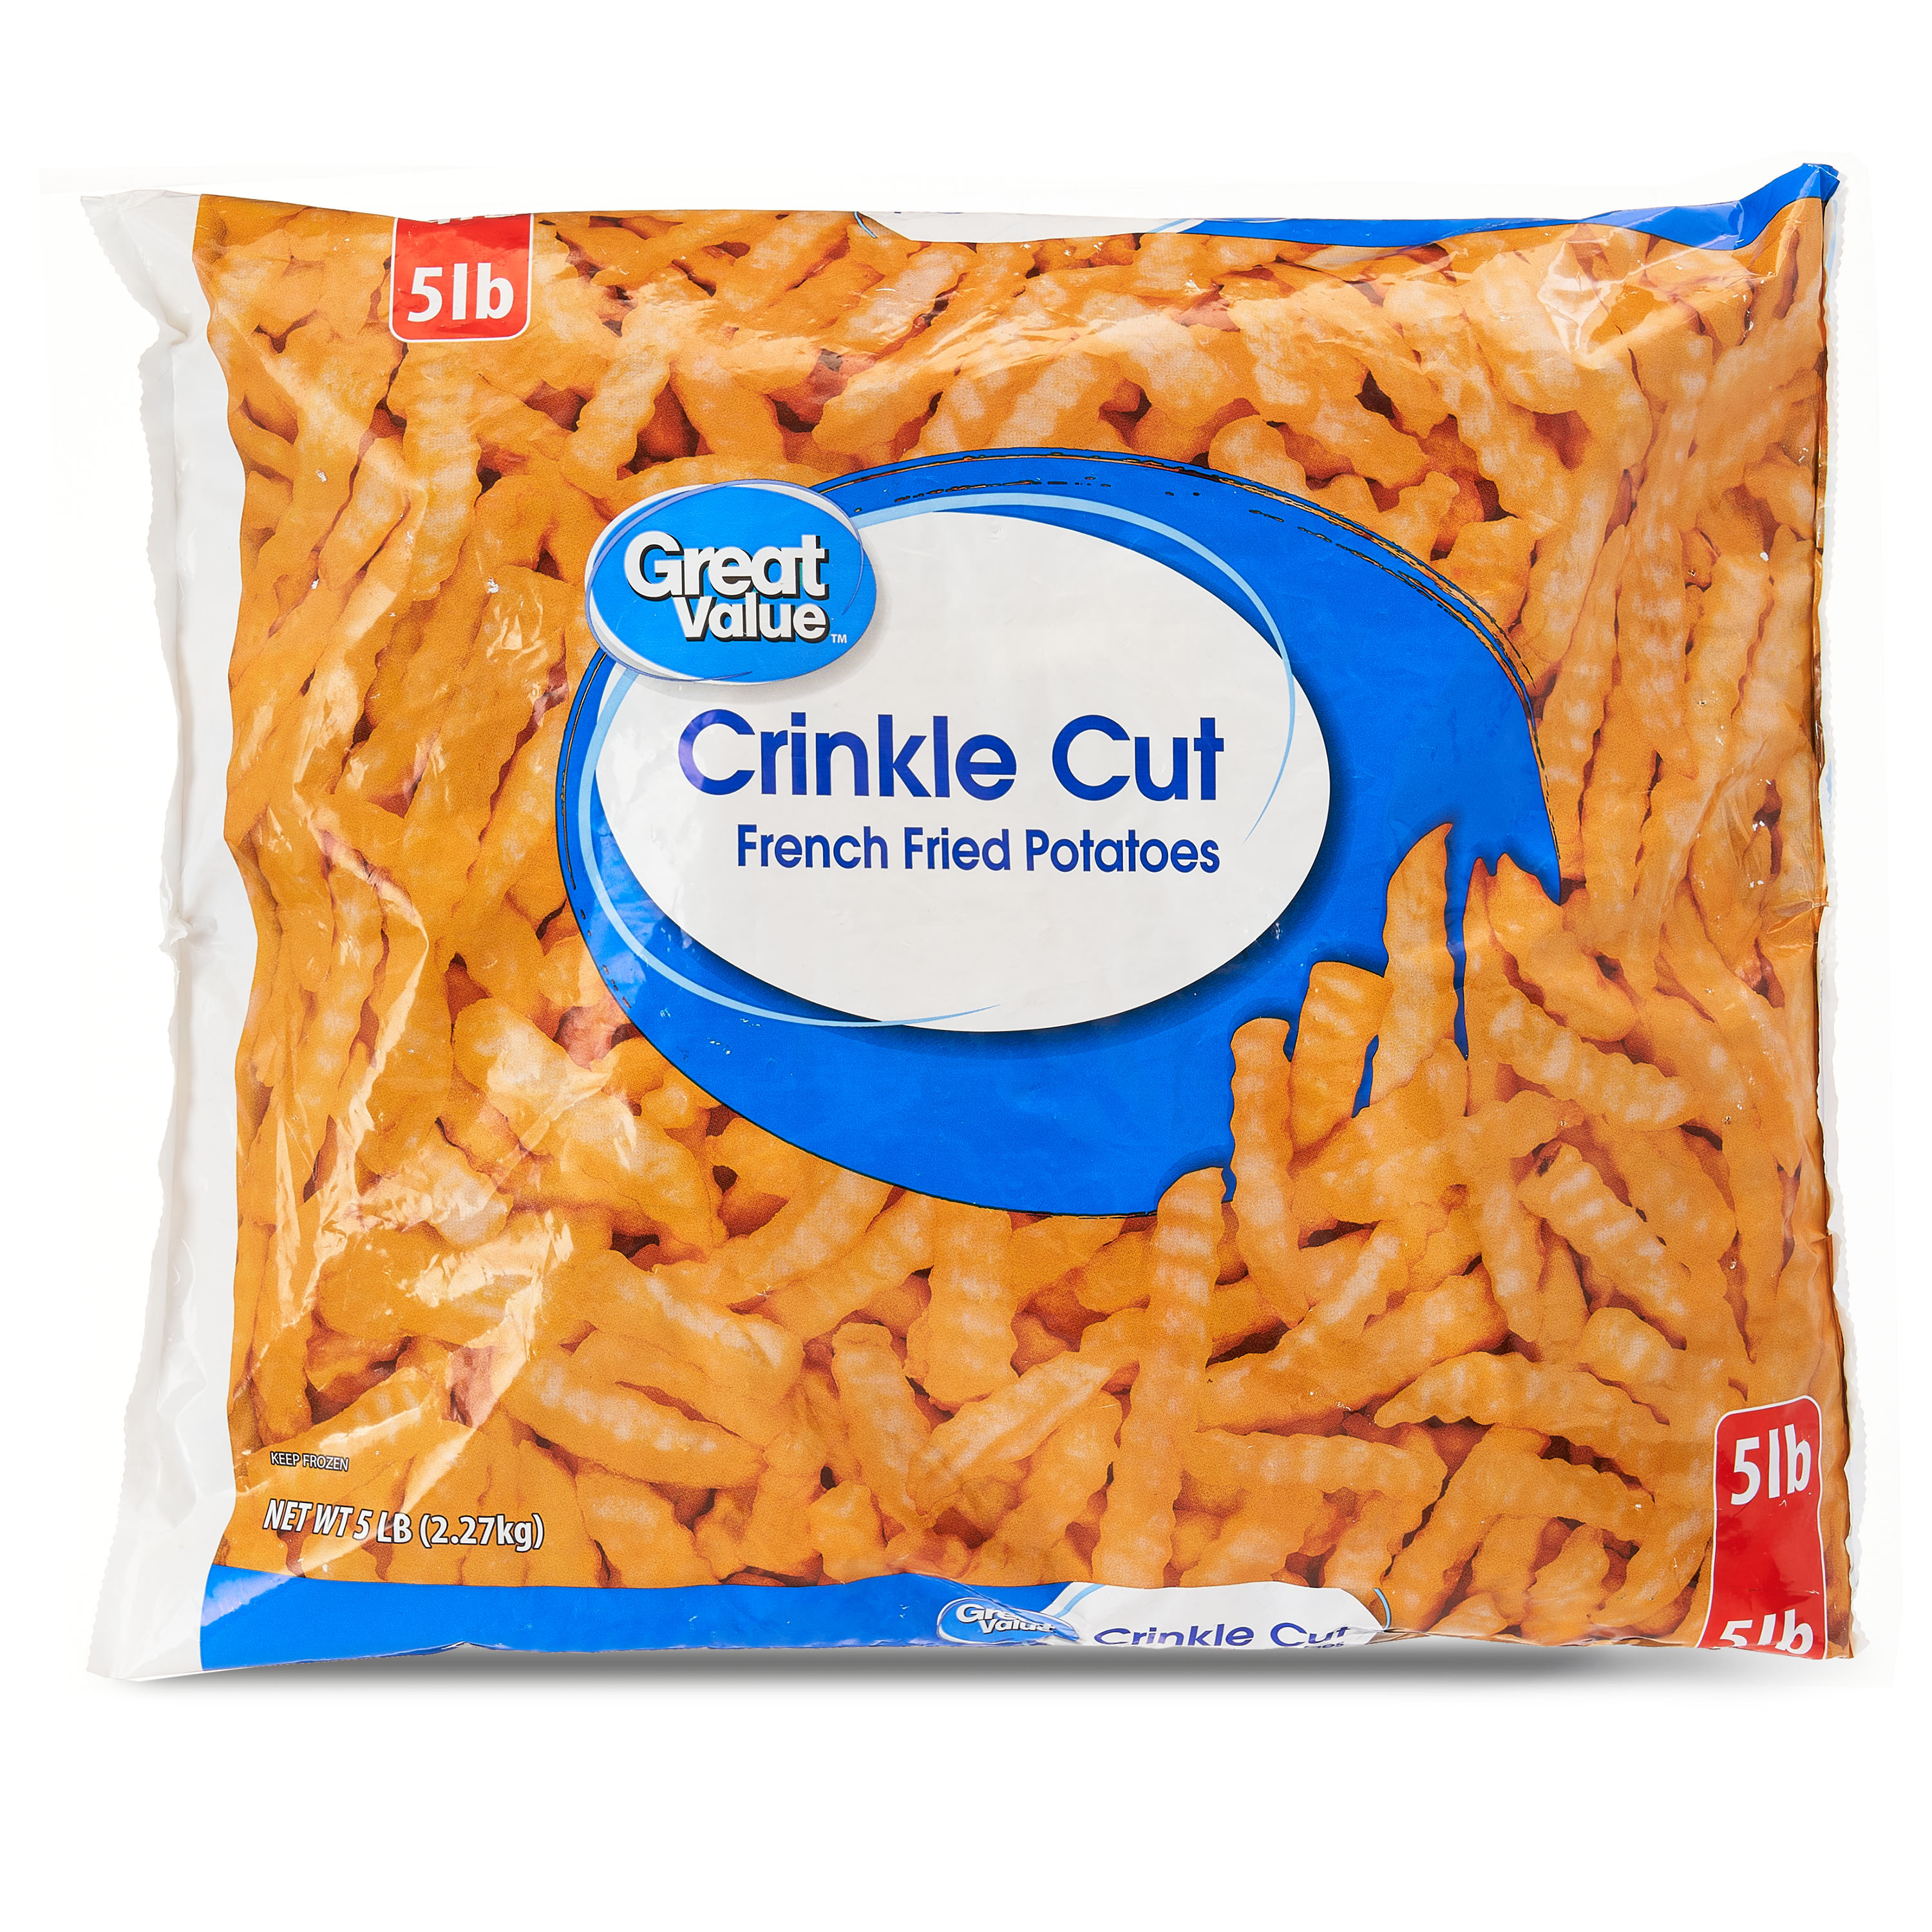 Great Value Crinkle Cut French Fried Potatoes, 80 oz Bag (Frozen) - image 1 of 8